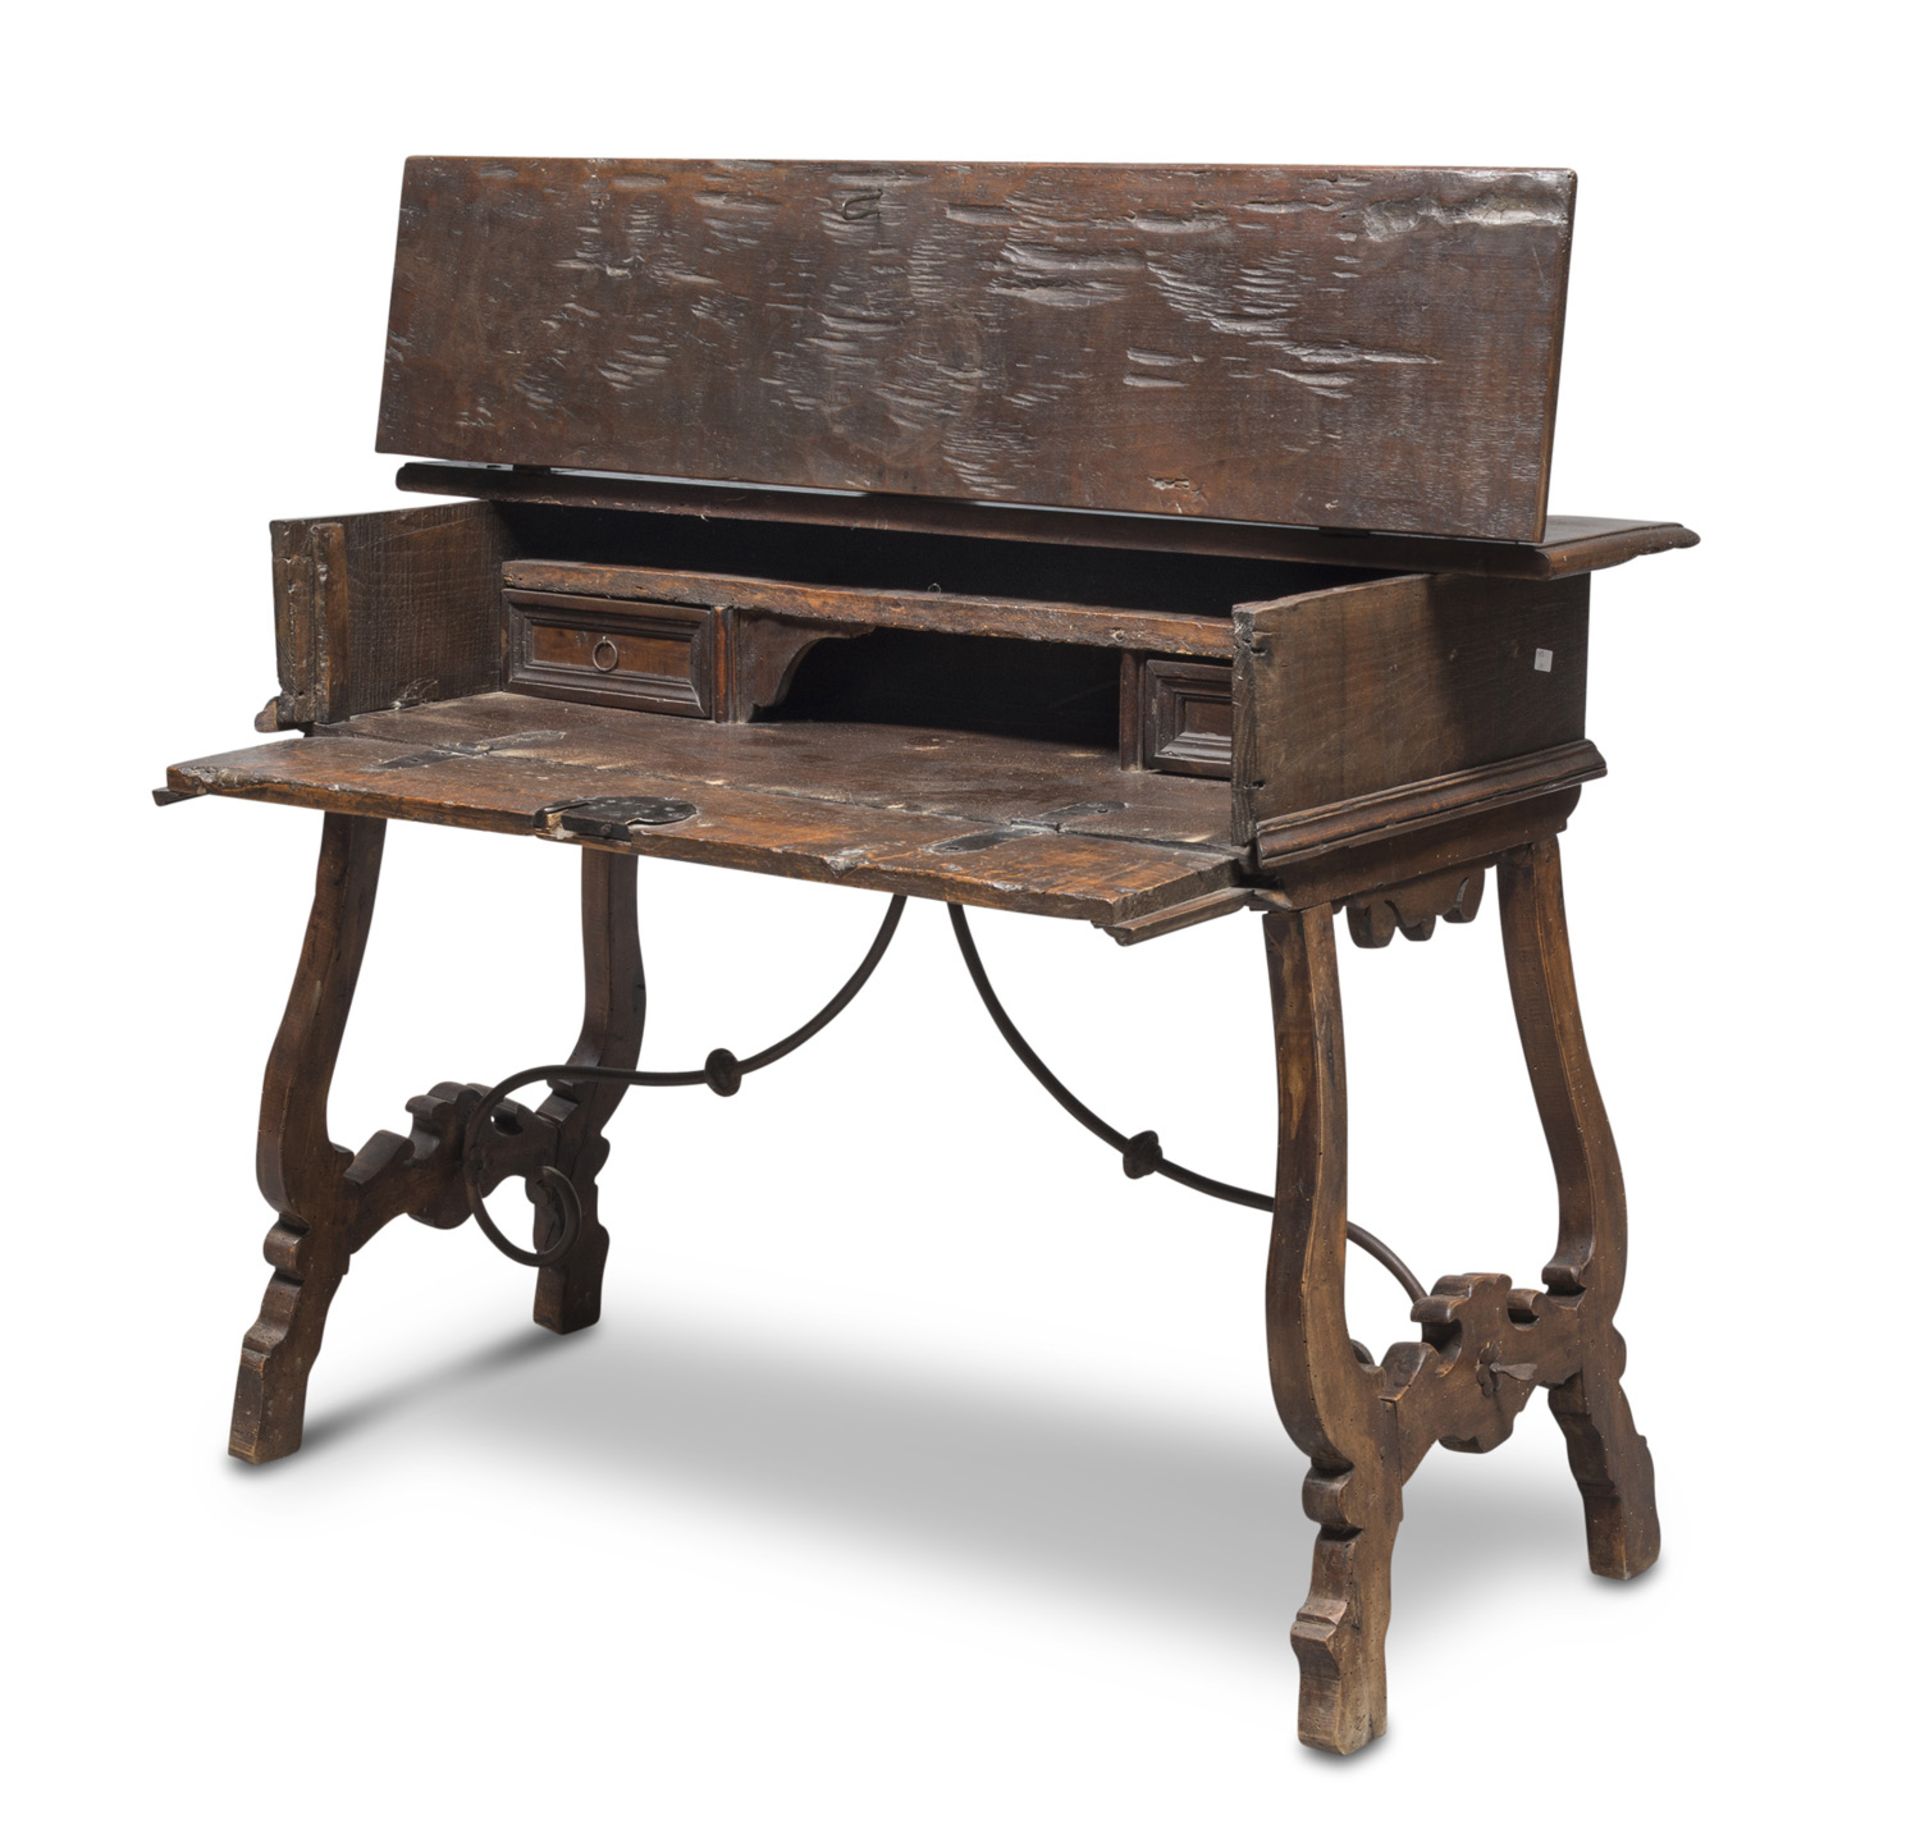 SANFILIPPO DESK IN WALNUT, ELEMENTS OF THE 18TH CENTURY inside with drawers and large - Image 2 of 2